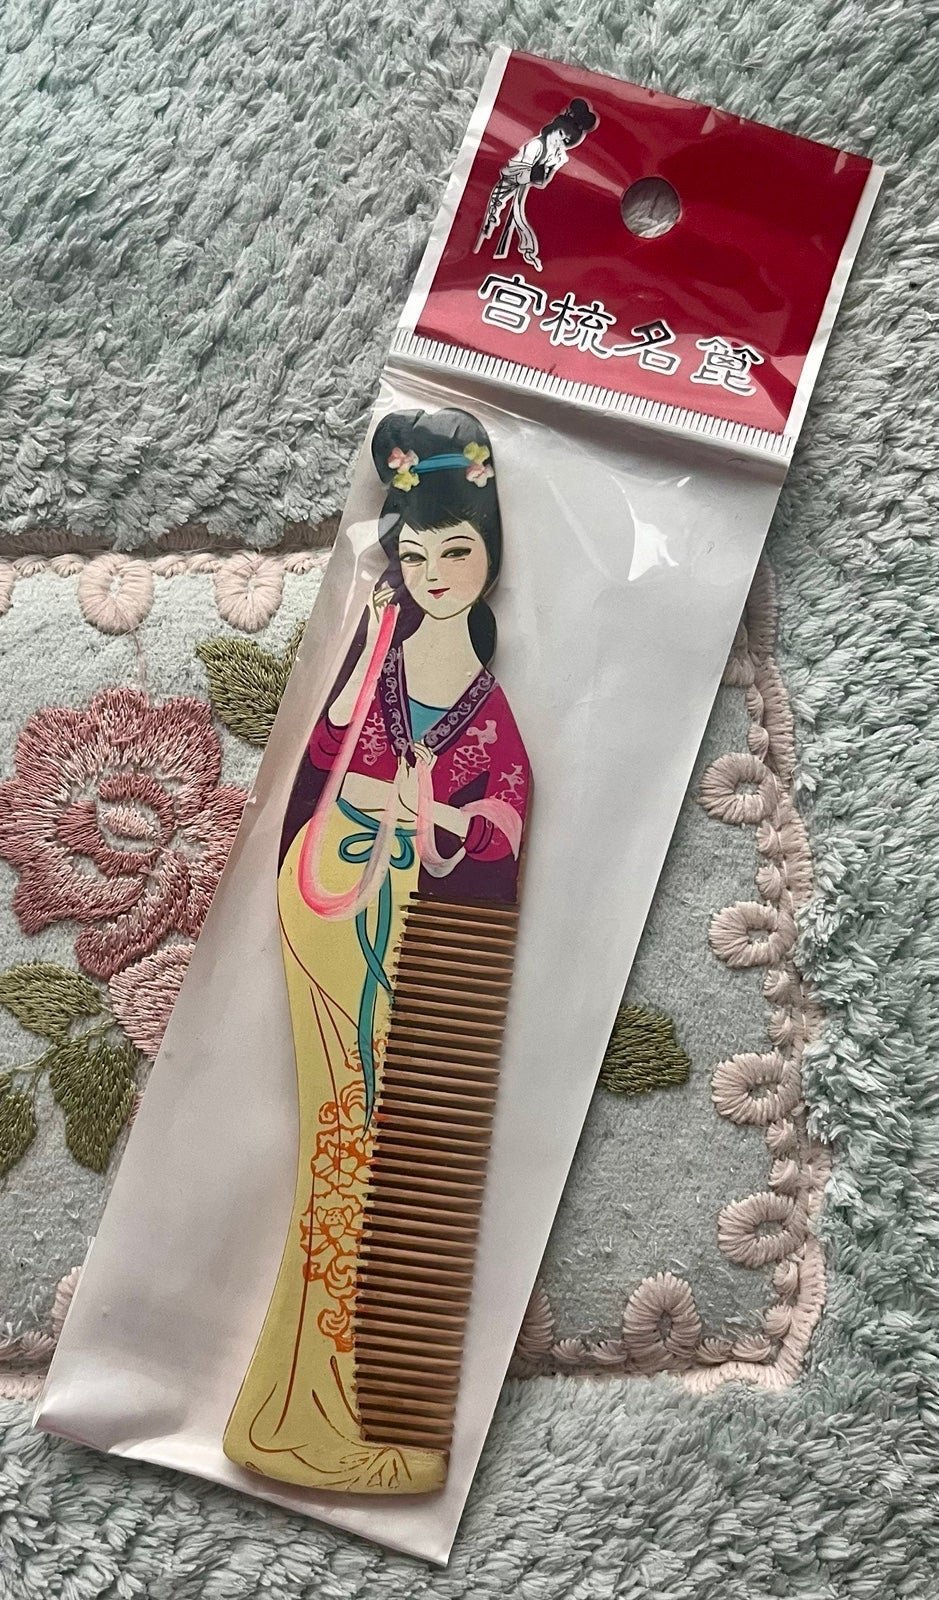 NEW vintage wooden Changzhou comb with Chinese princess 3c7HzWpGr